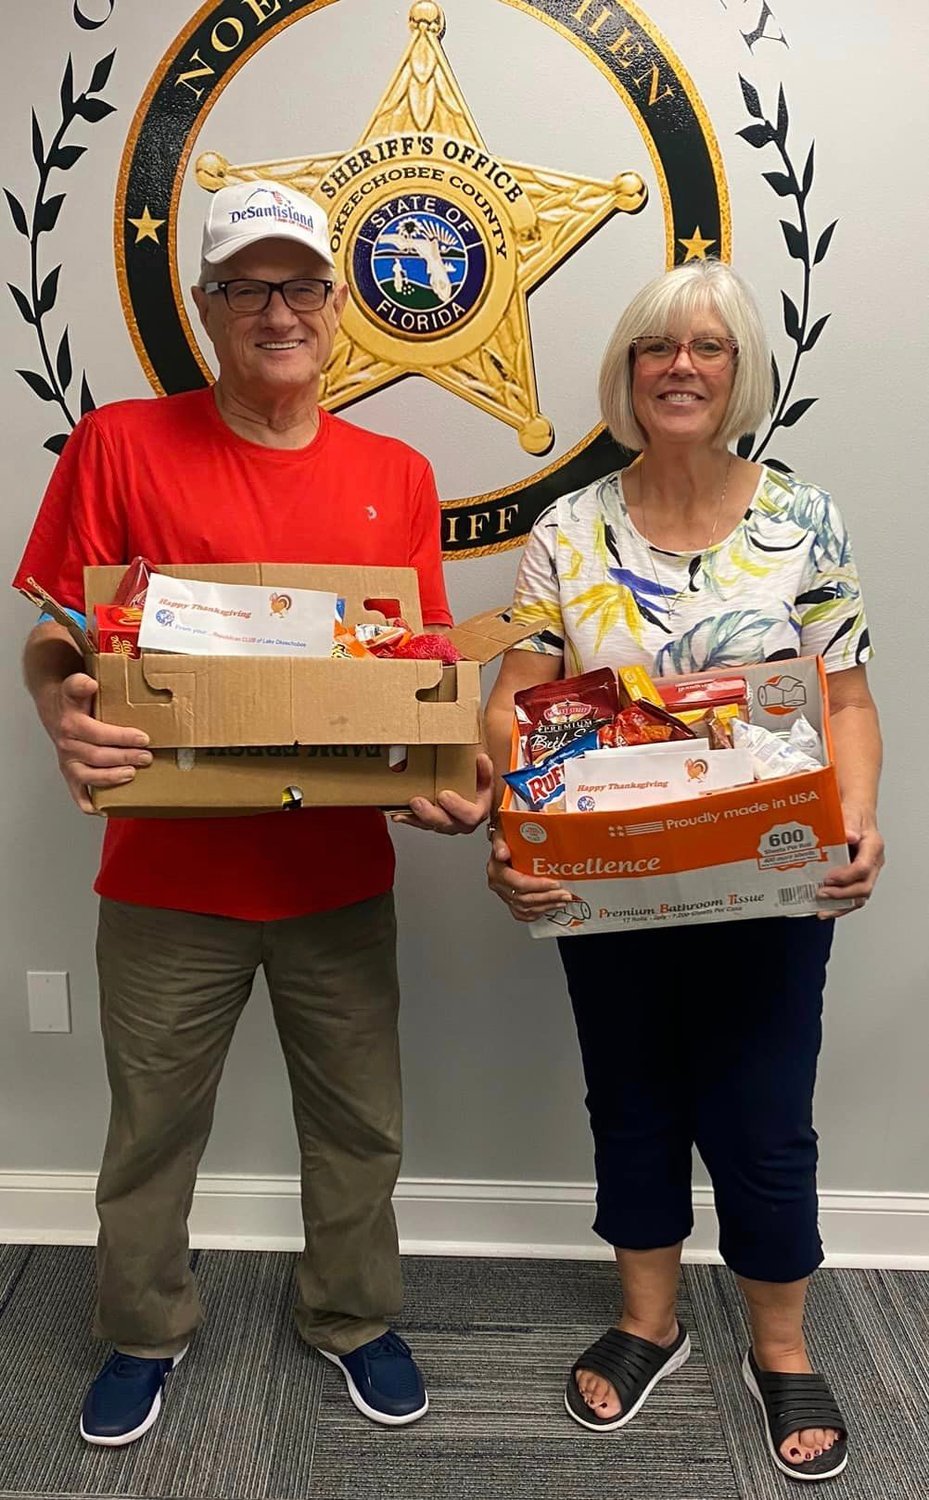 Jim and Sallie Craig donated boxes full of food and included gift certificates to buy turkey.